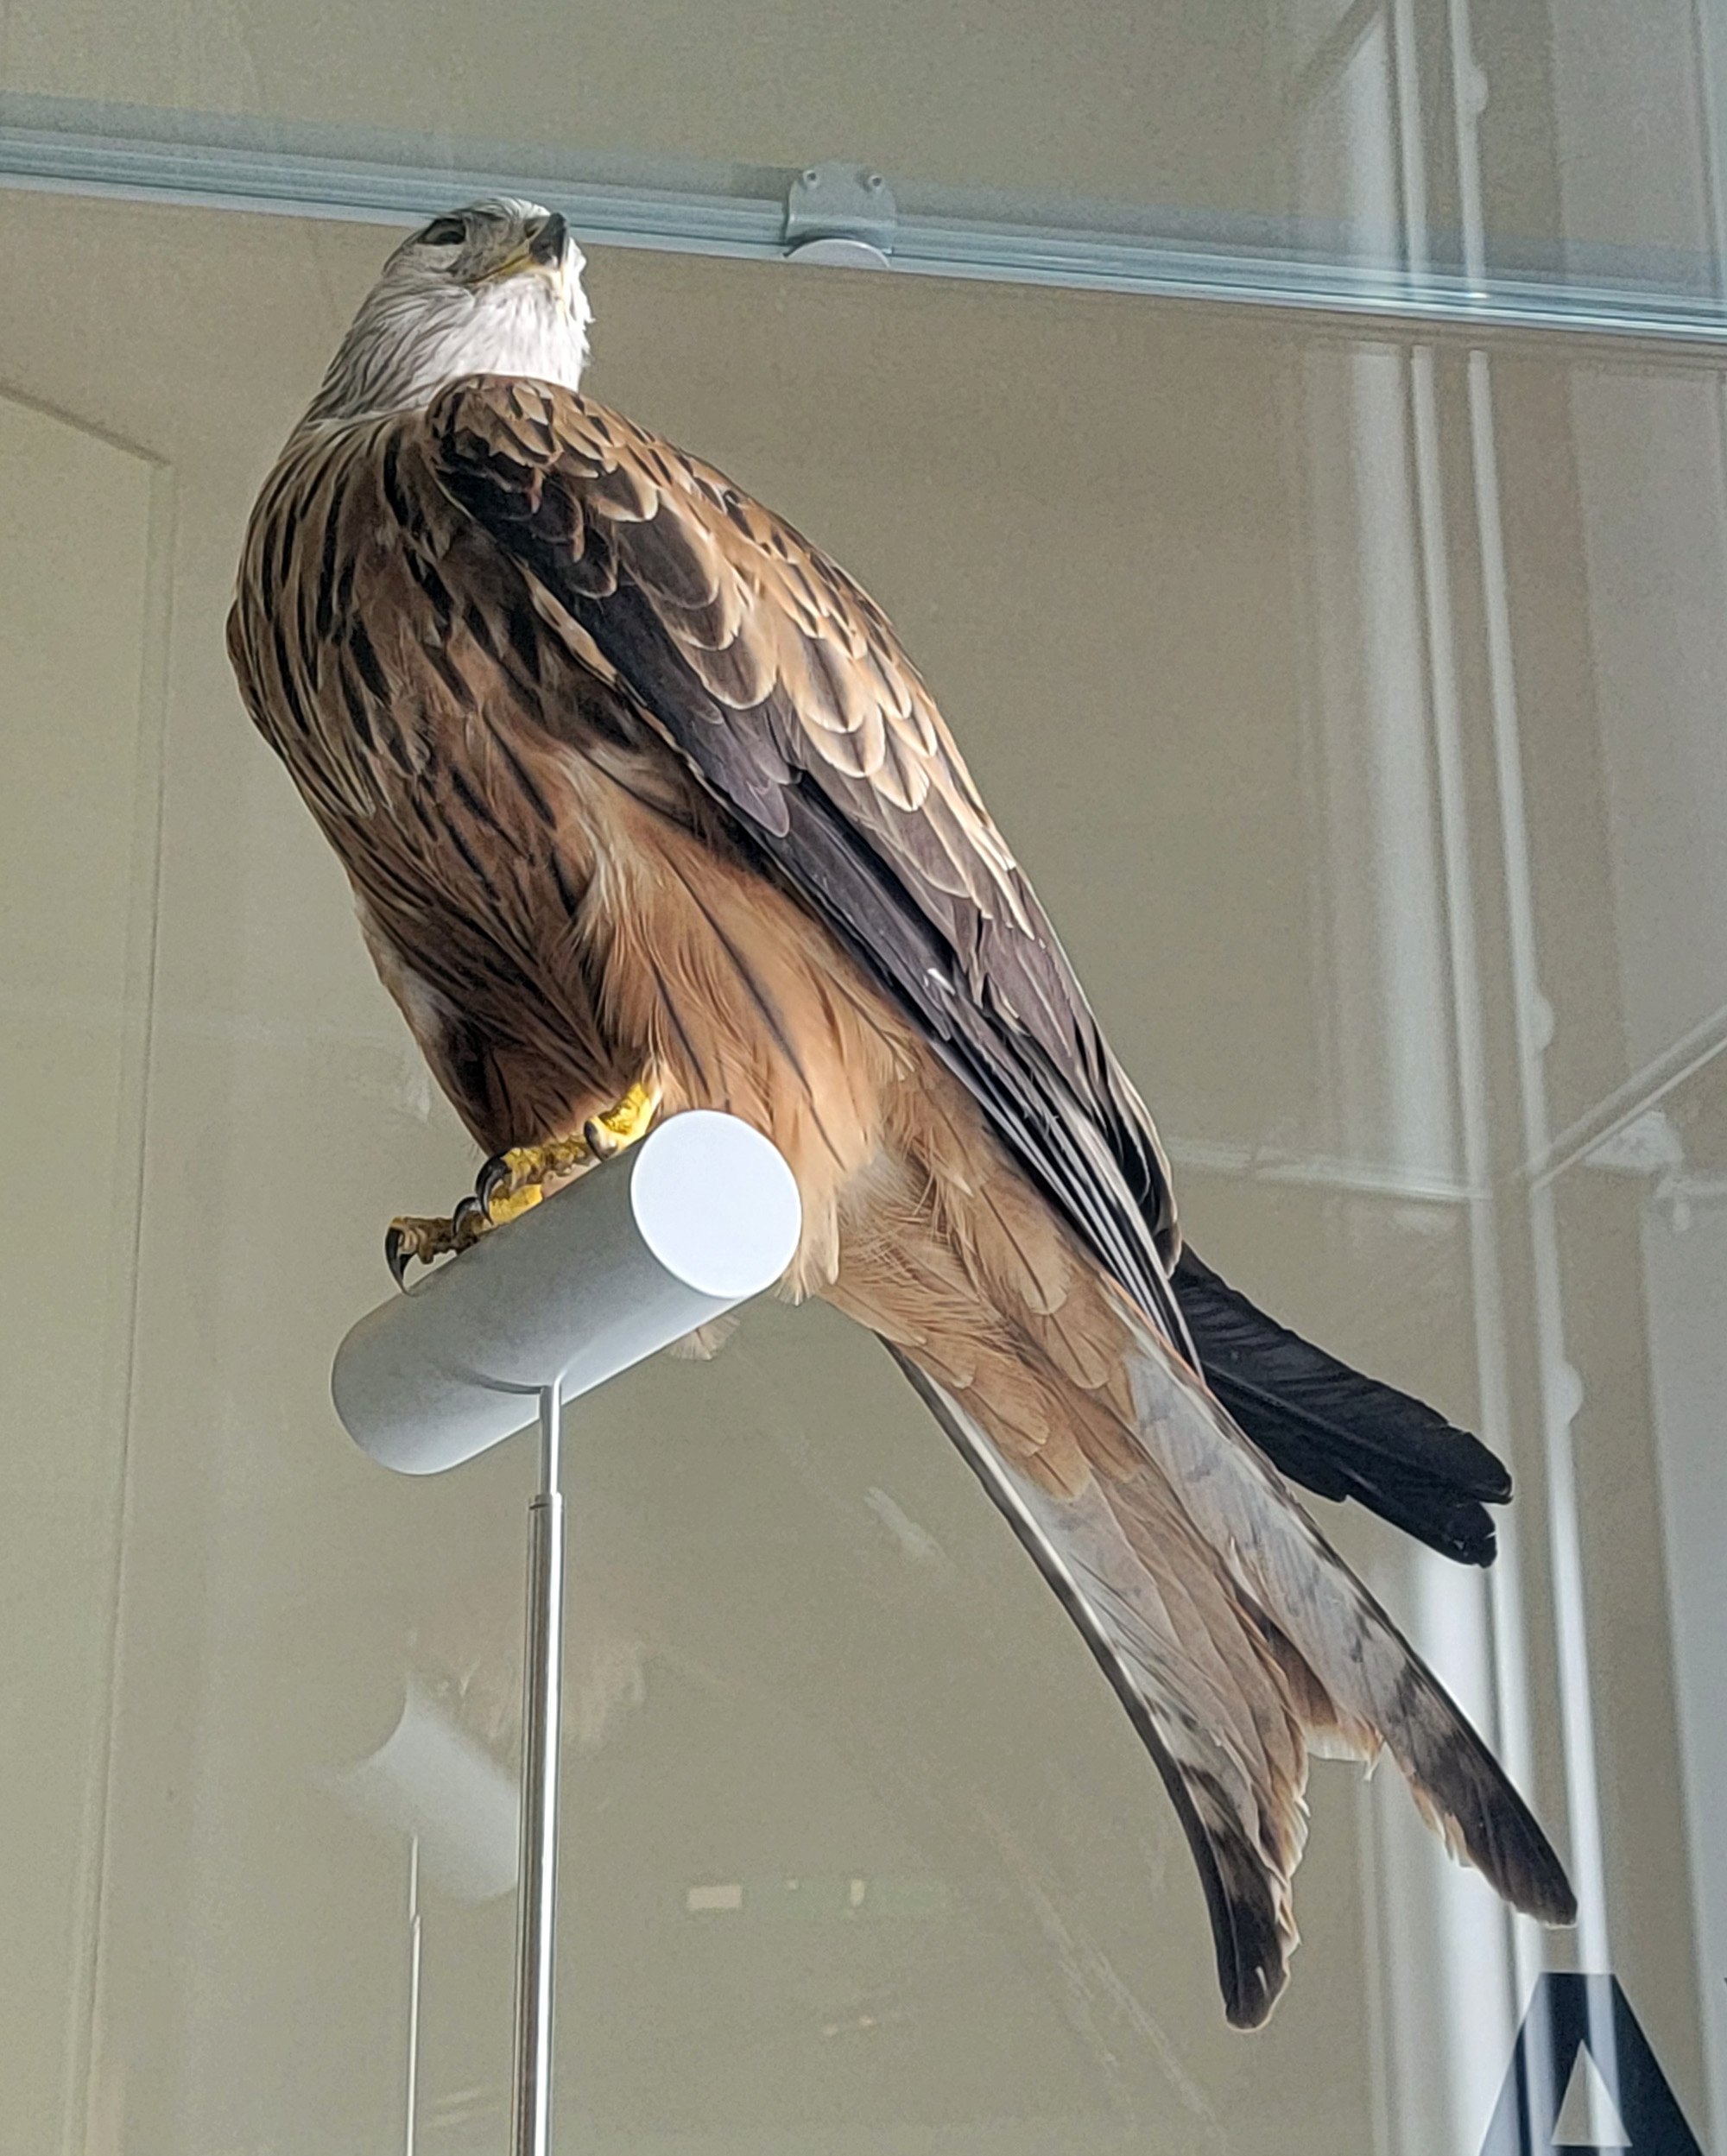 Even some that went extinct like this cool falcon : (